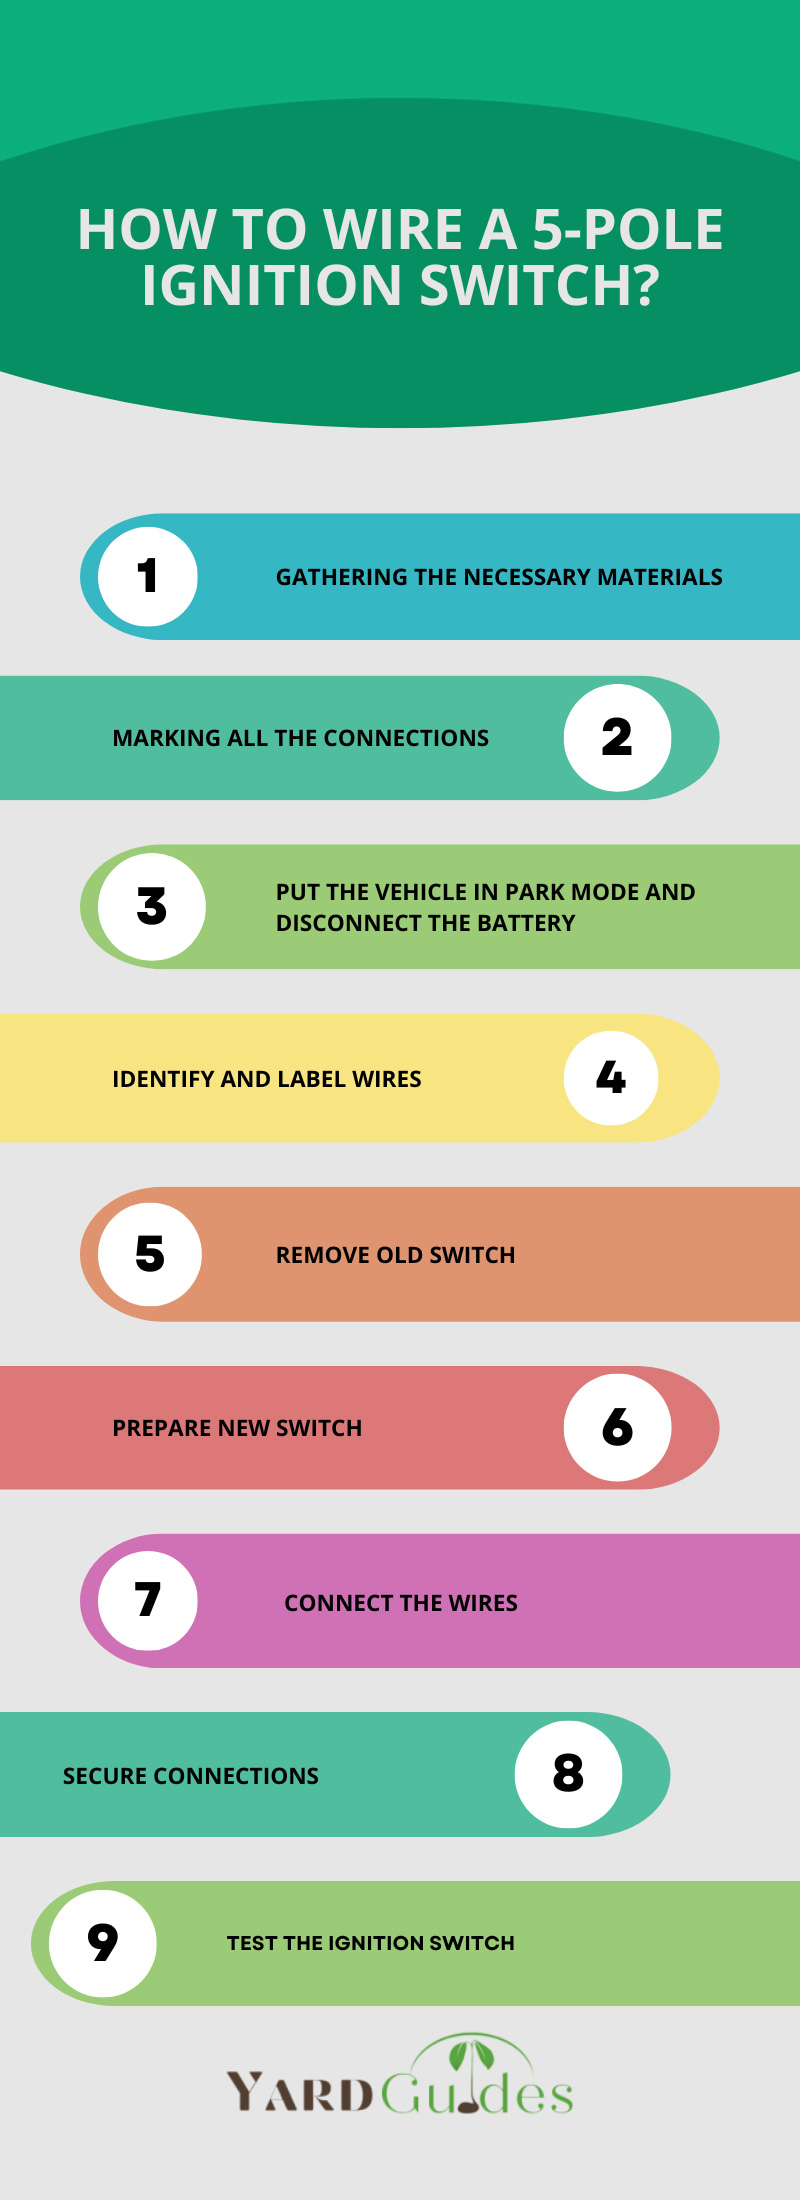 how to wire a 5 pole ignition switch